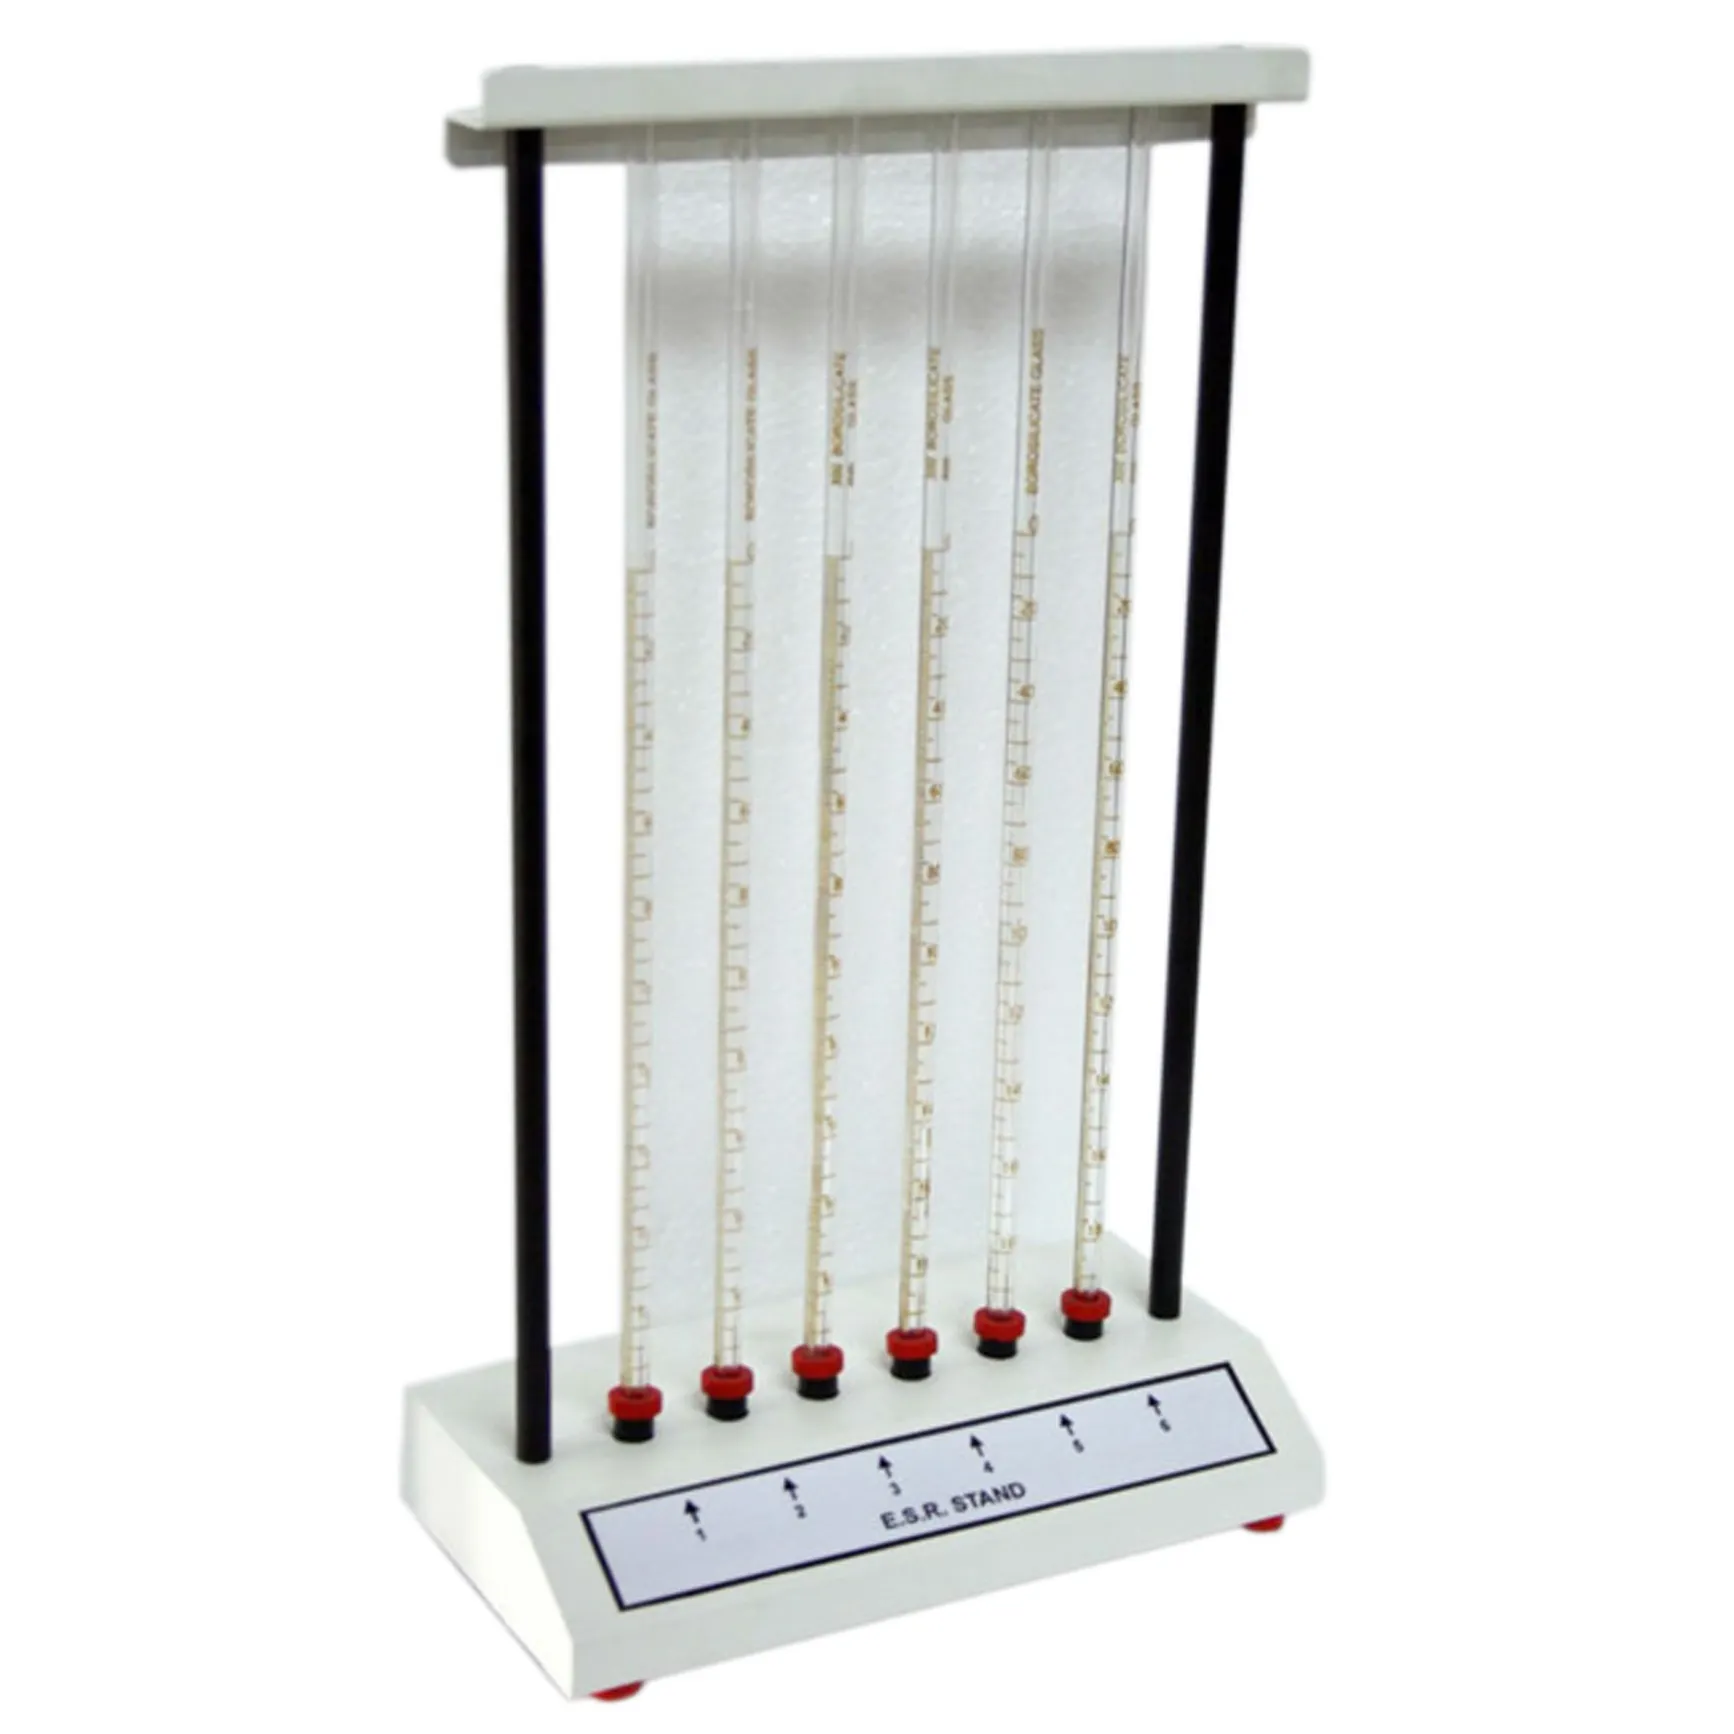 ESR Stand with Tubes Consumable Medical Supplies ESR Tube Stand laboratory used Radical